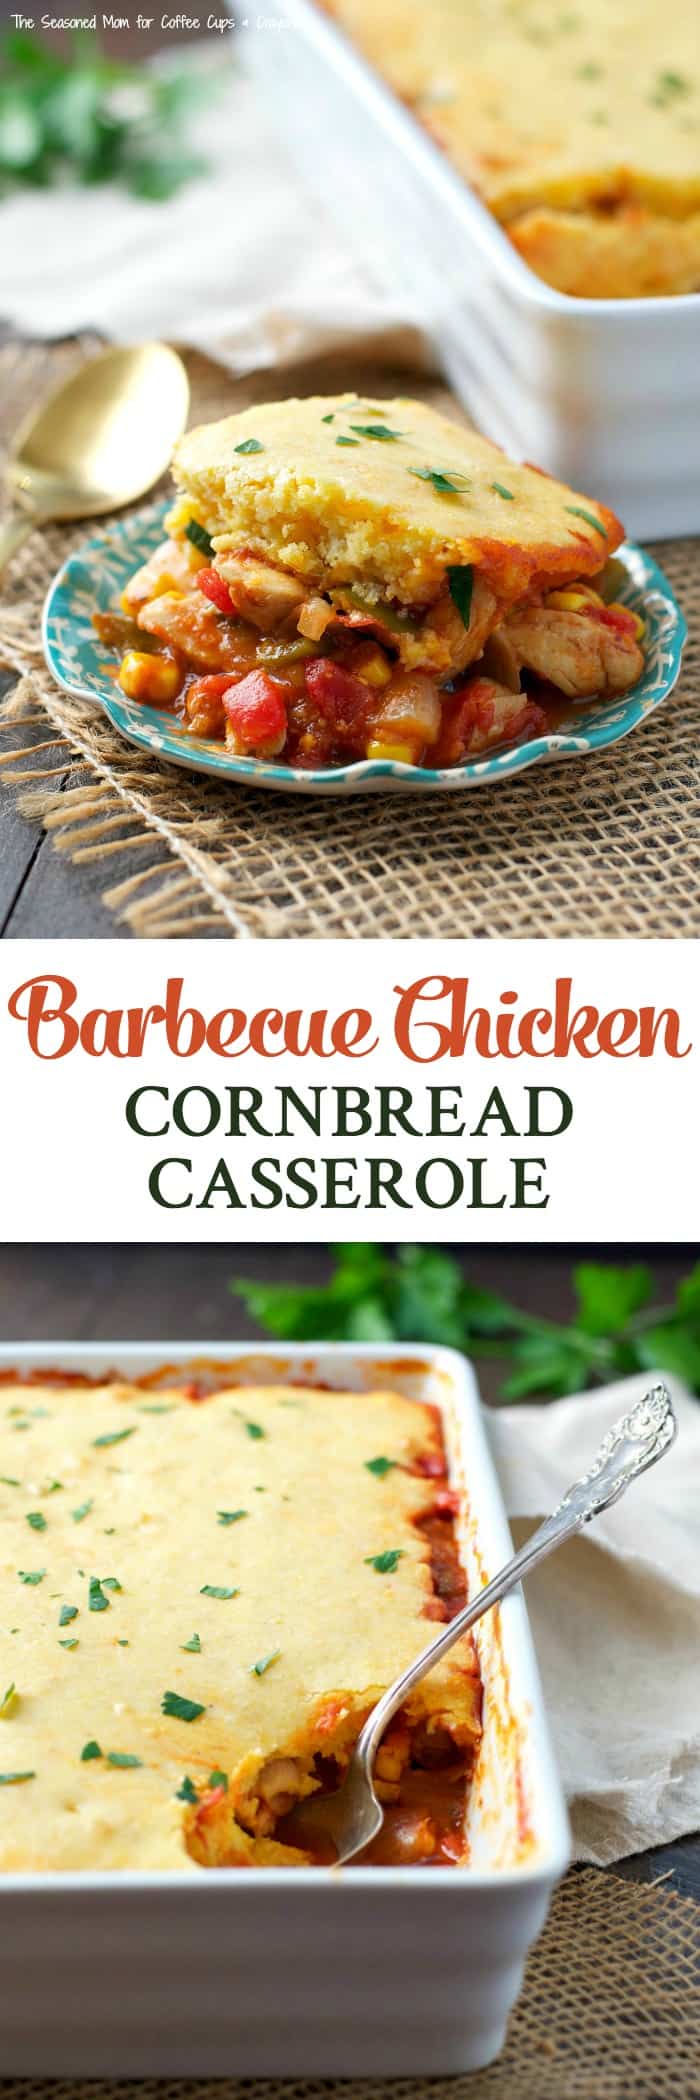 This Barbecue Chicken Cornbread Casserole is an easy dinner that comes together in just 15 minutes!